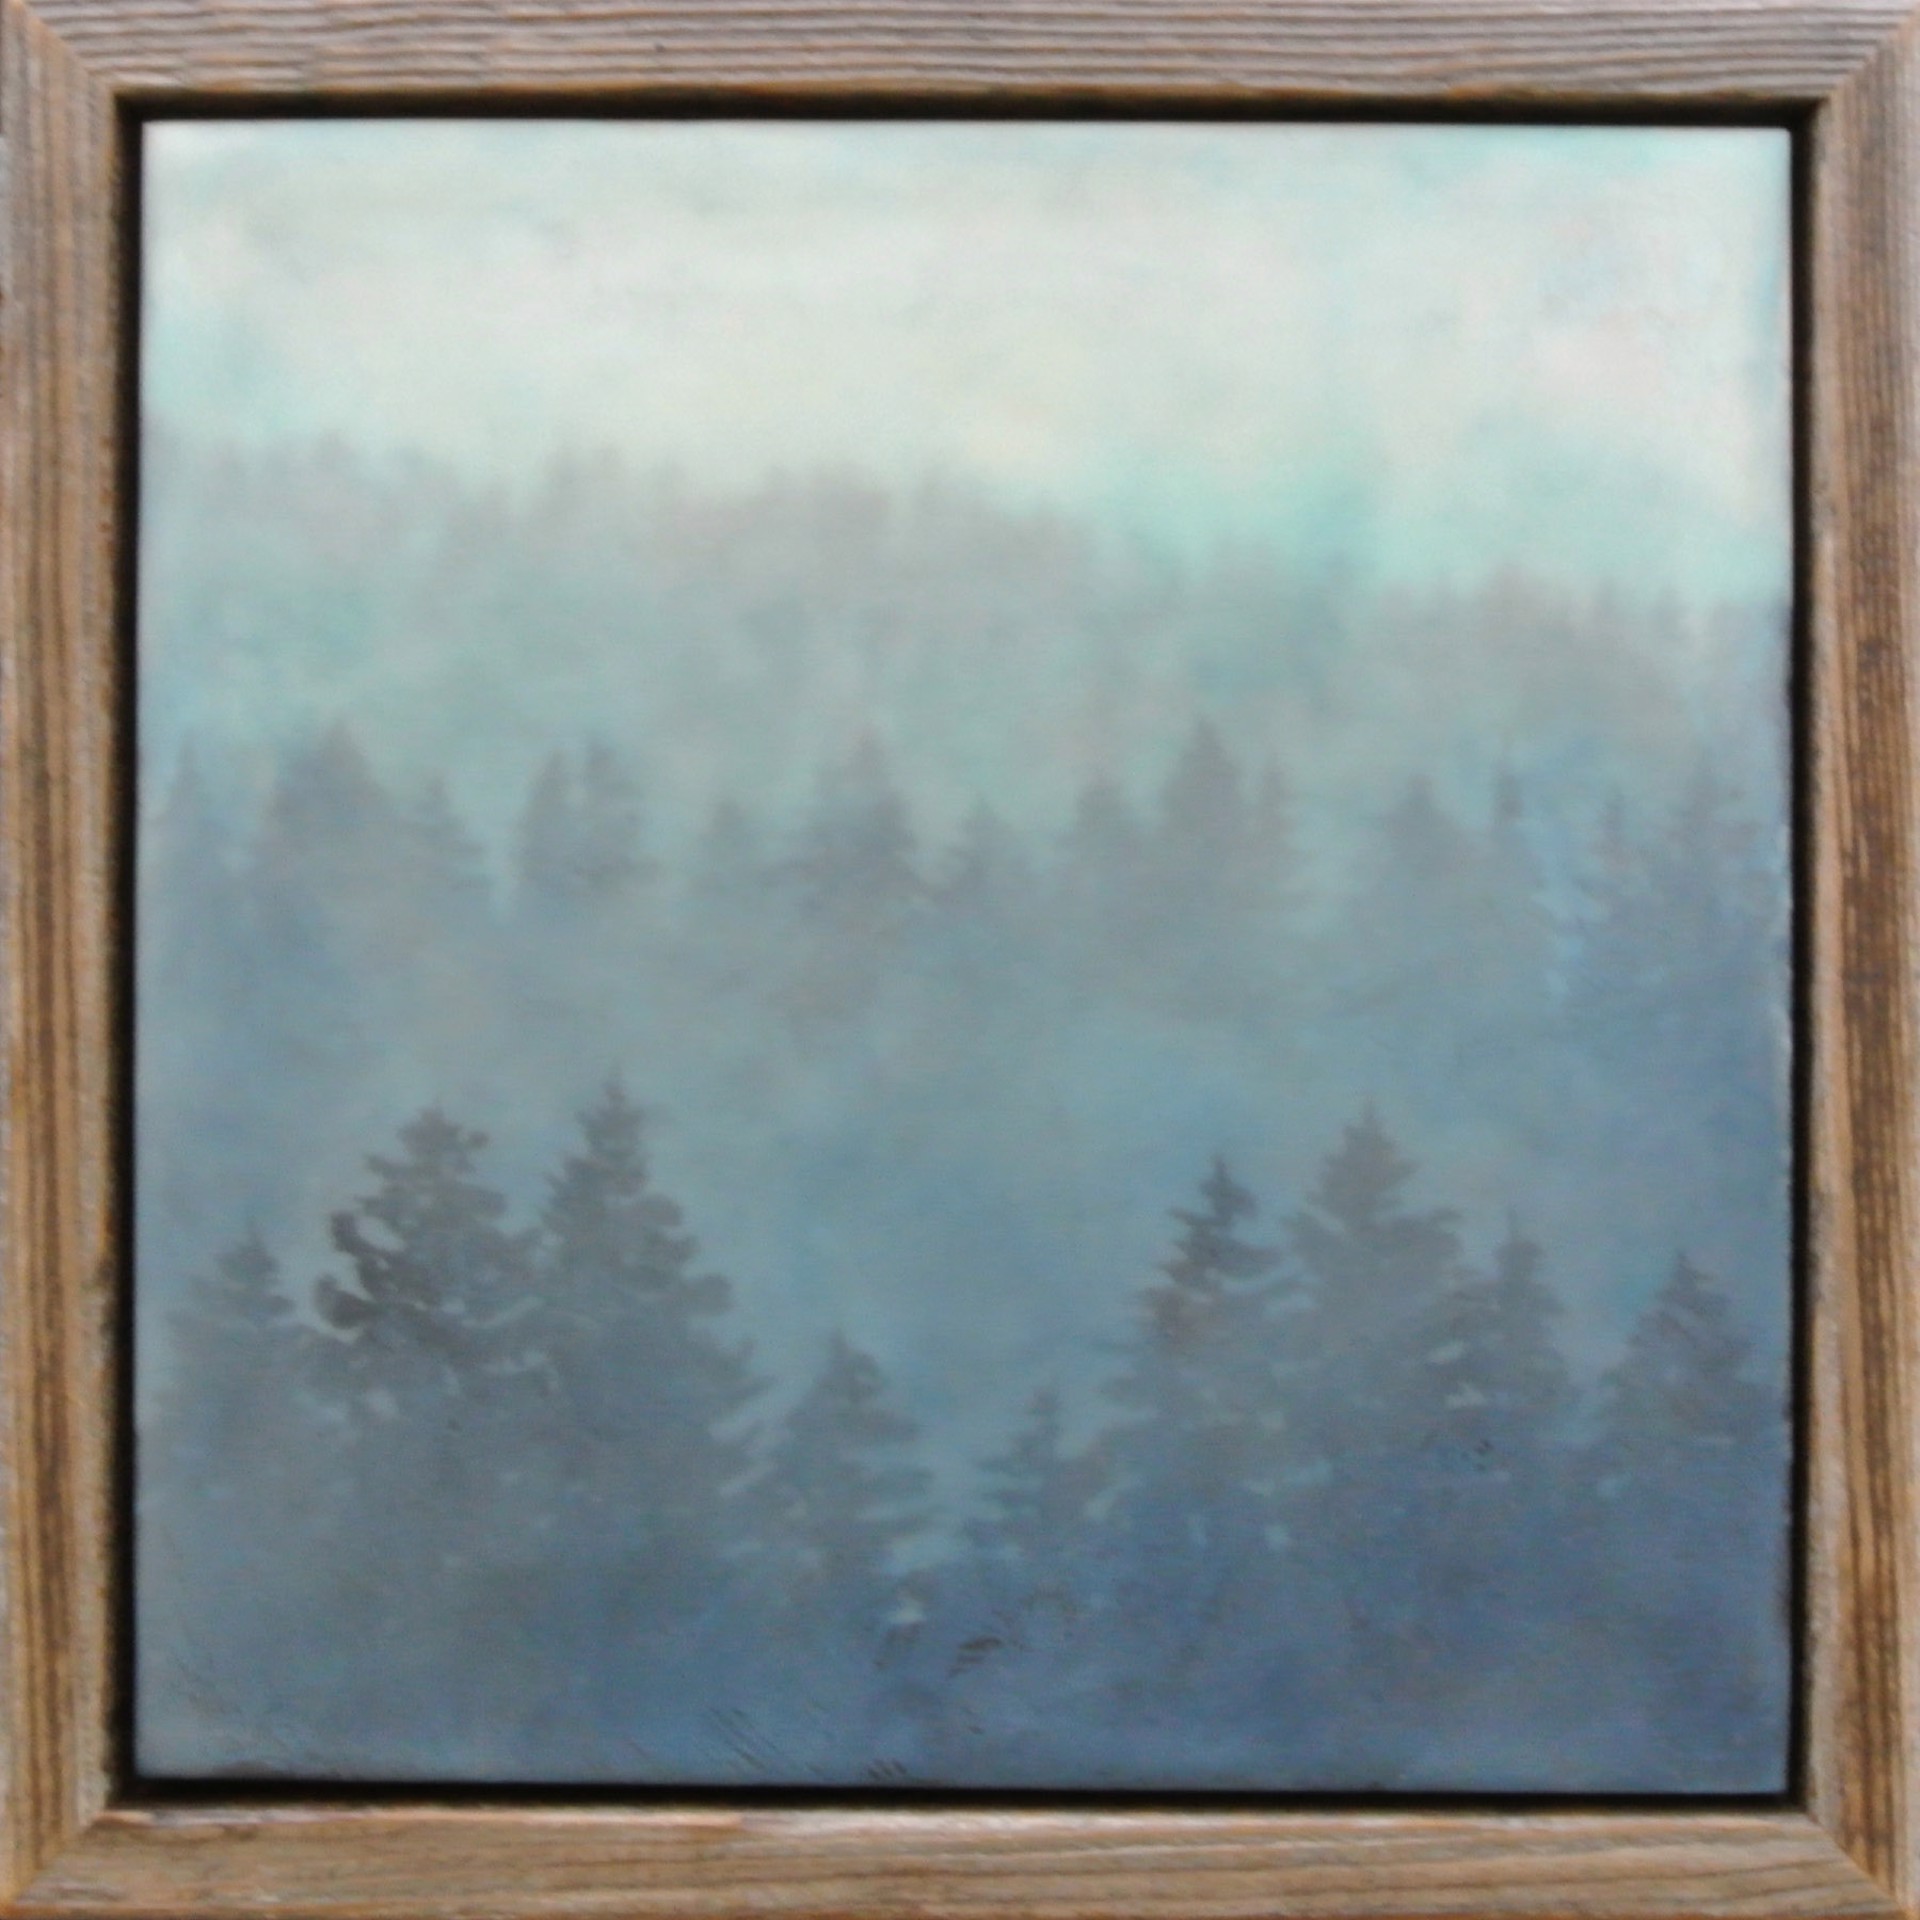 An Encaustic Painting Of A Hazy Layered Pine Forest In Shades Of Blue, By Bridgette Meinhold